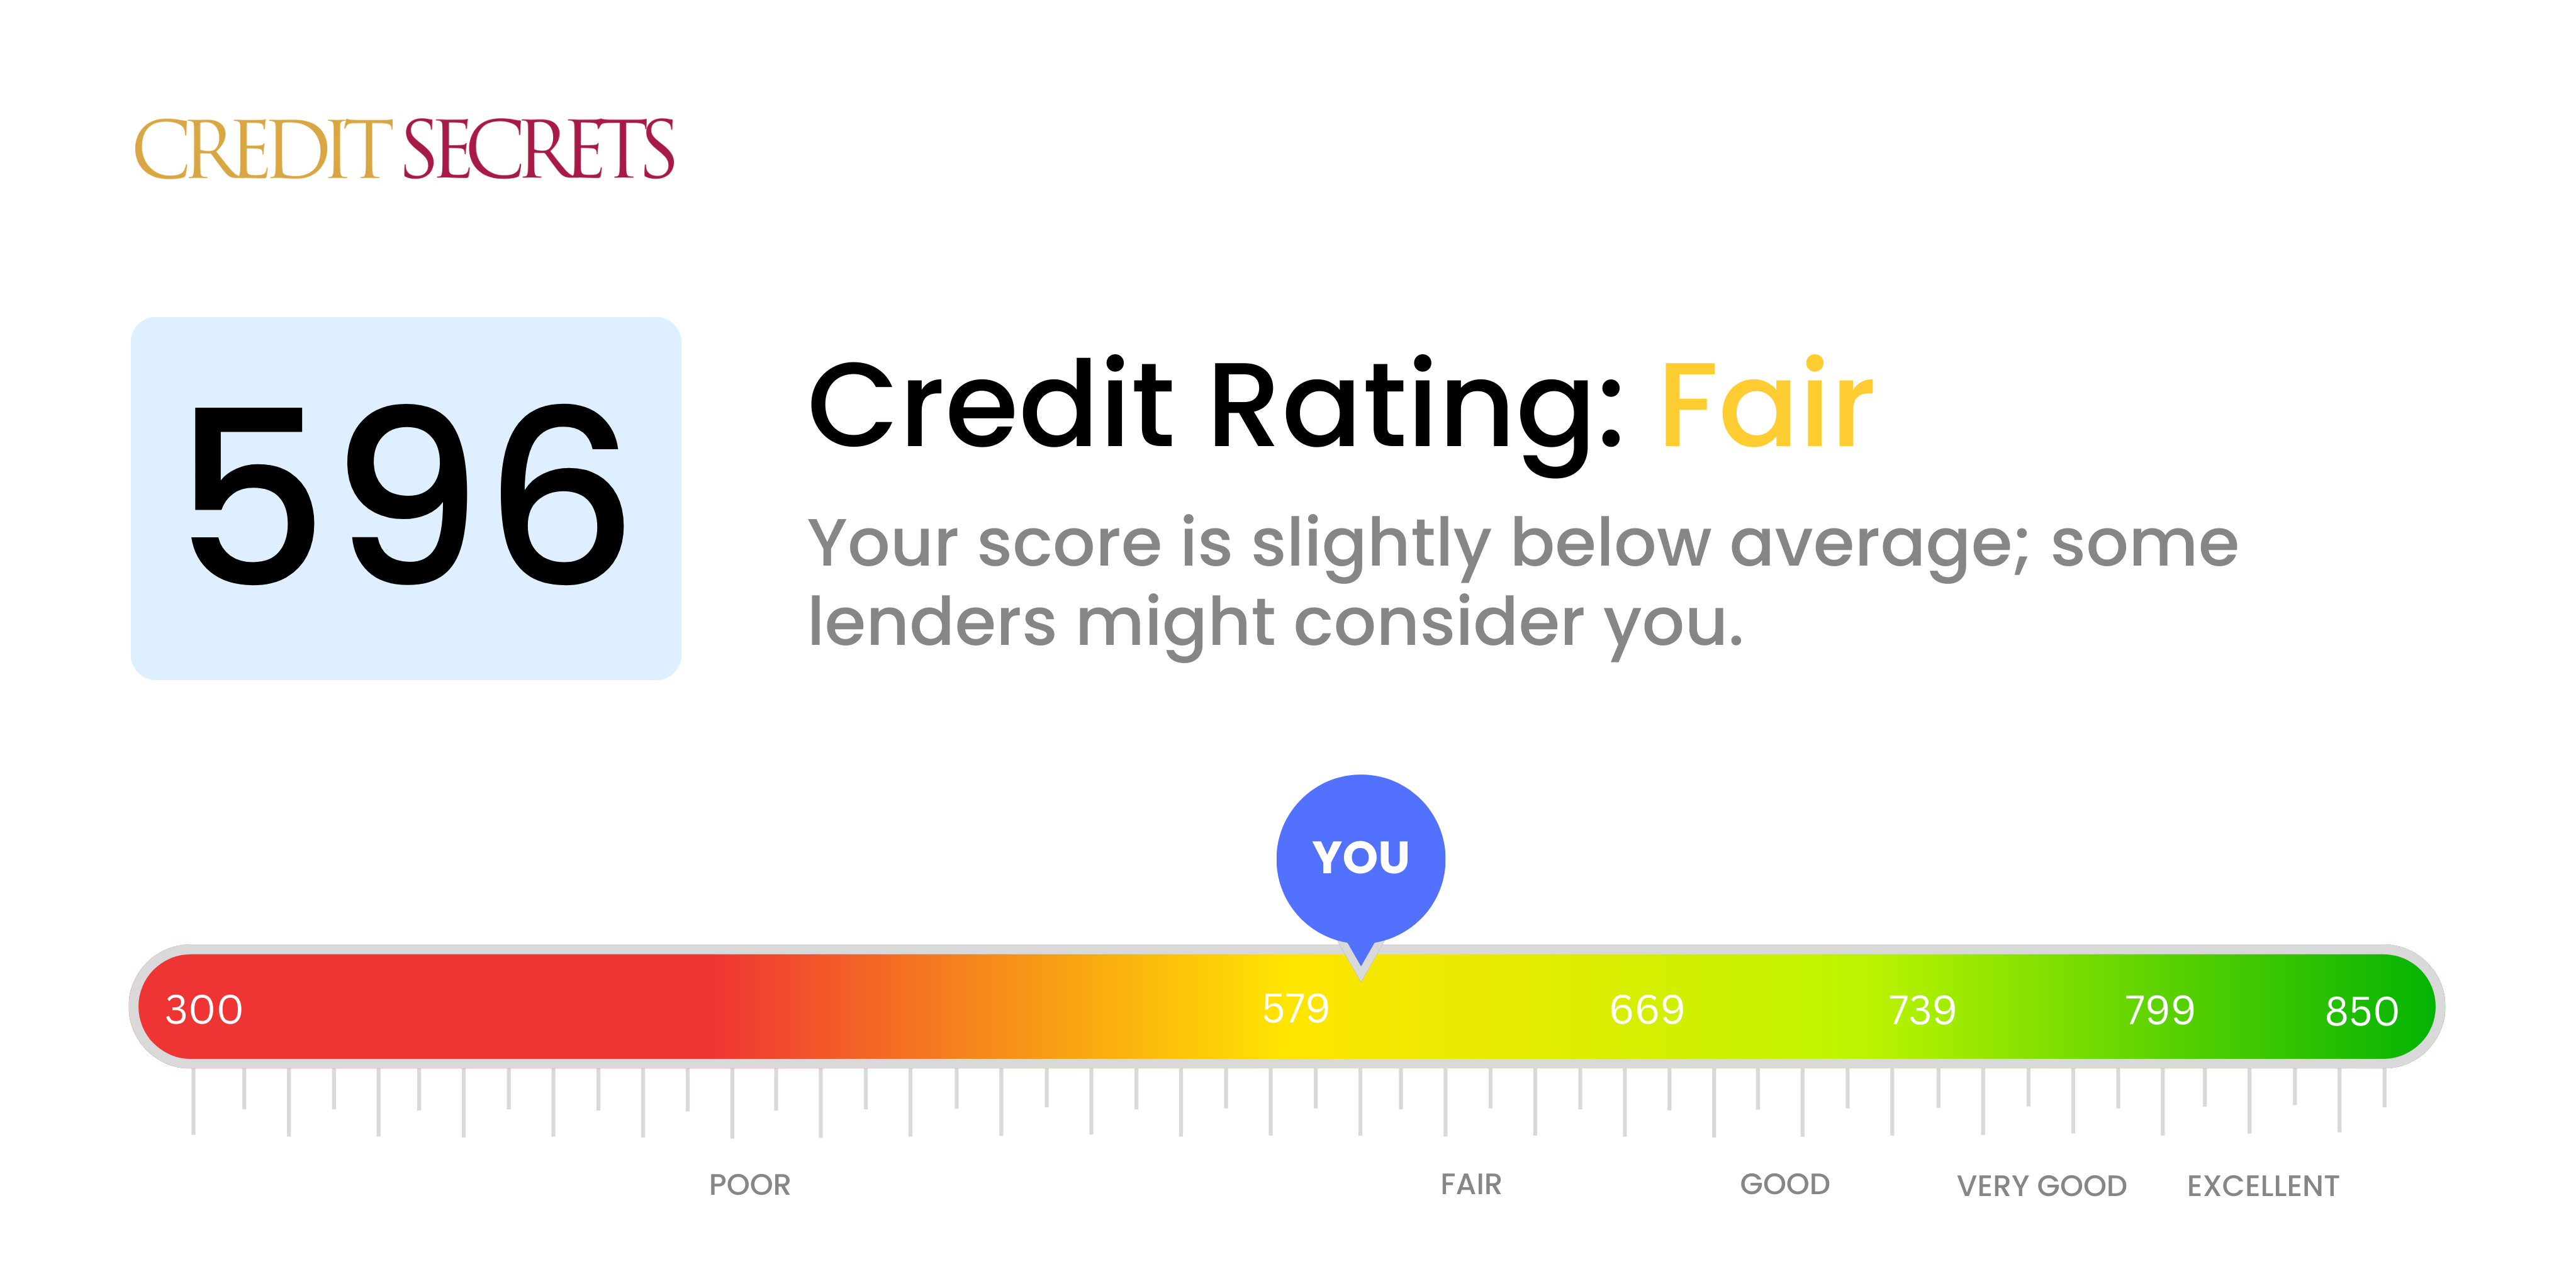 Is 596 a good credit score?